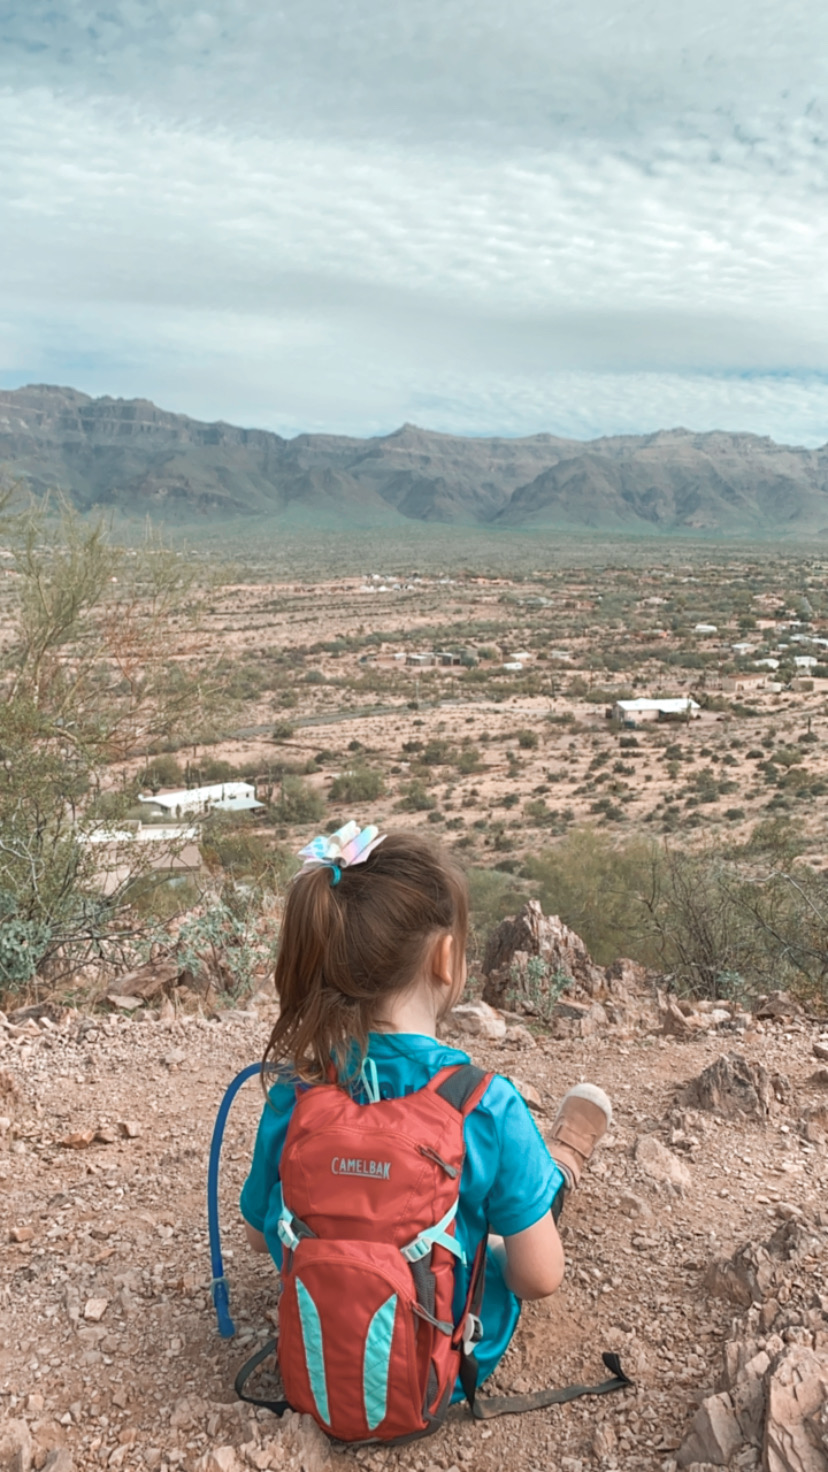 Little girl sitting on a desert hill overlooking nearby mountains.